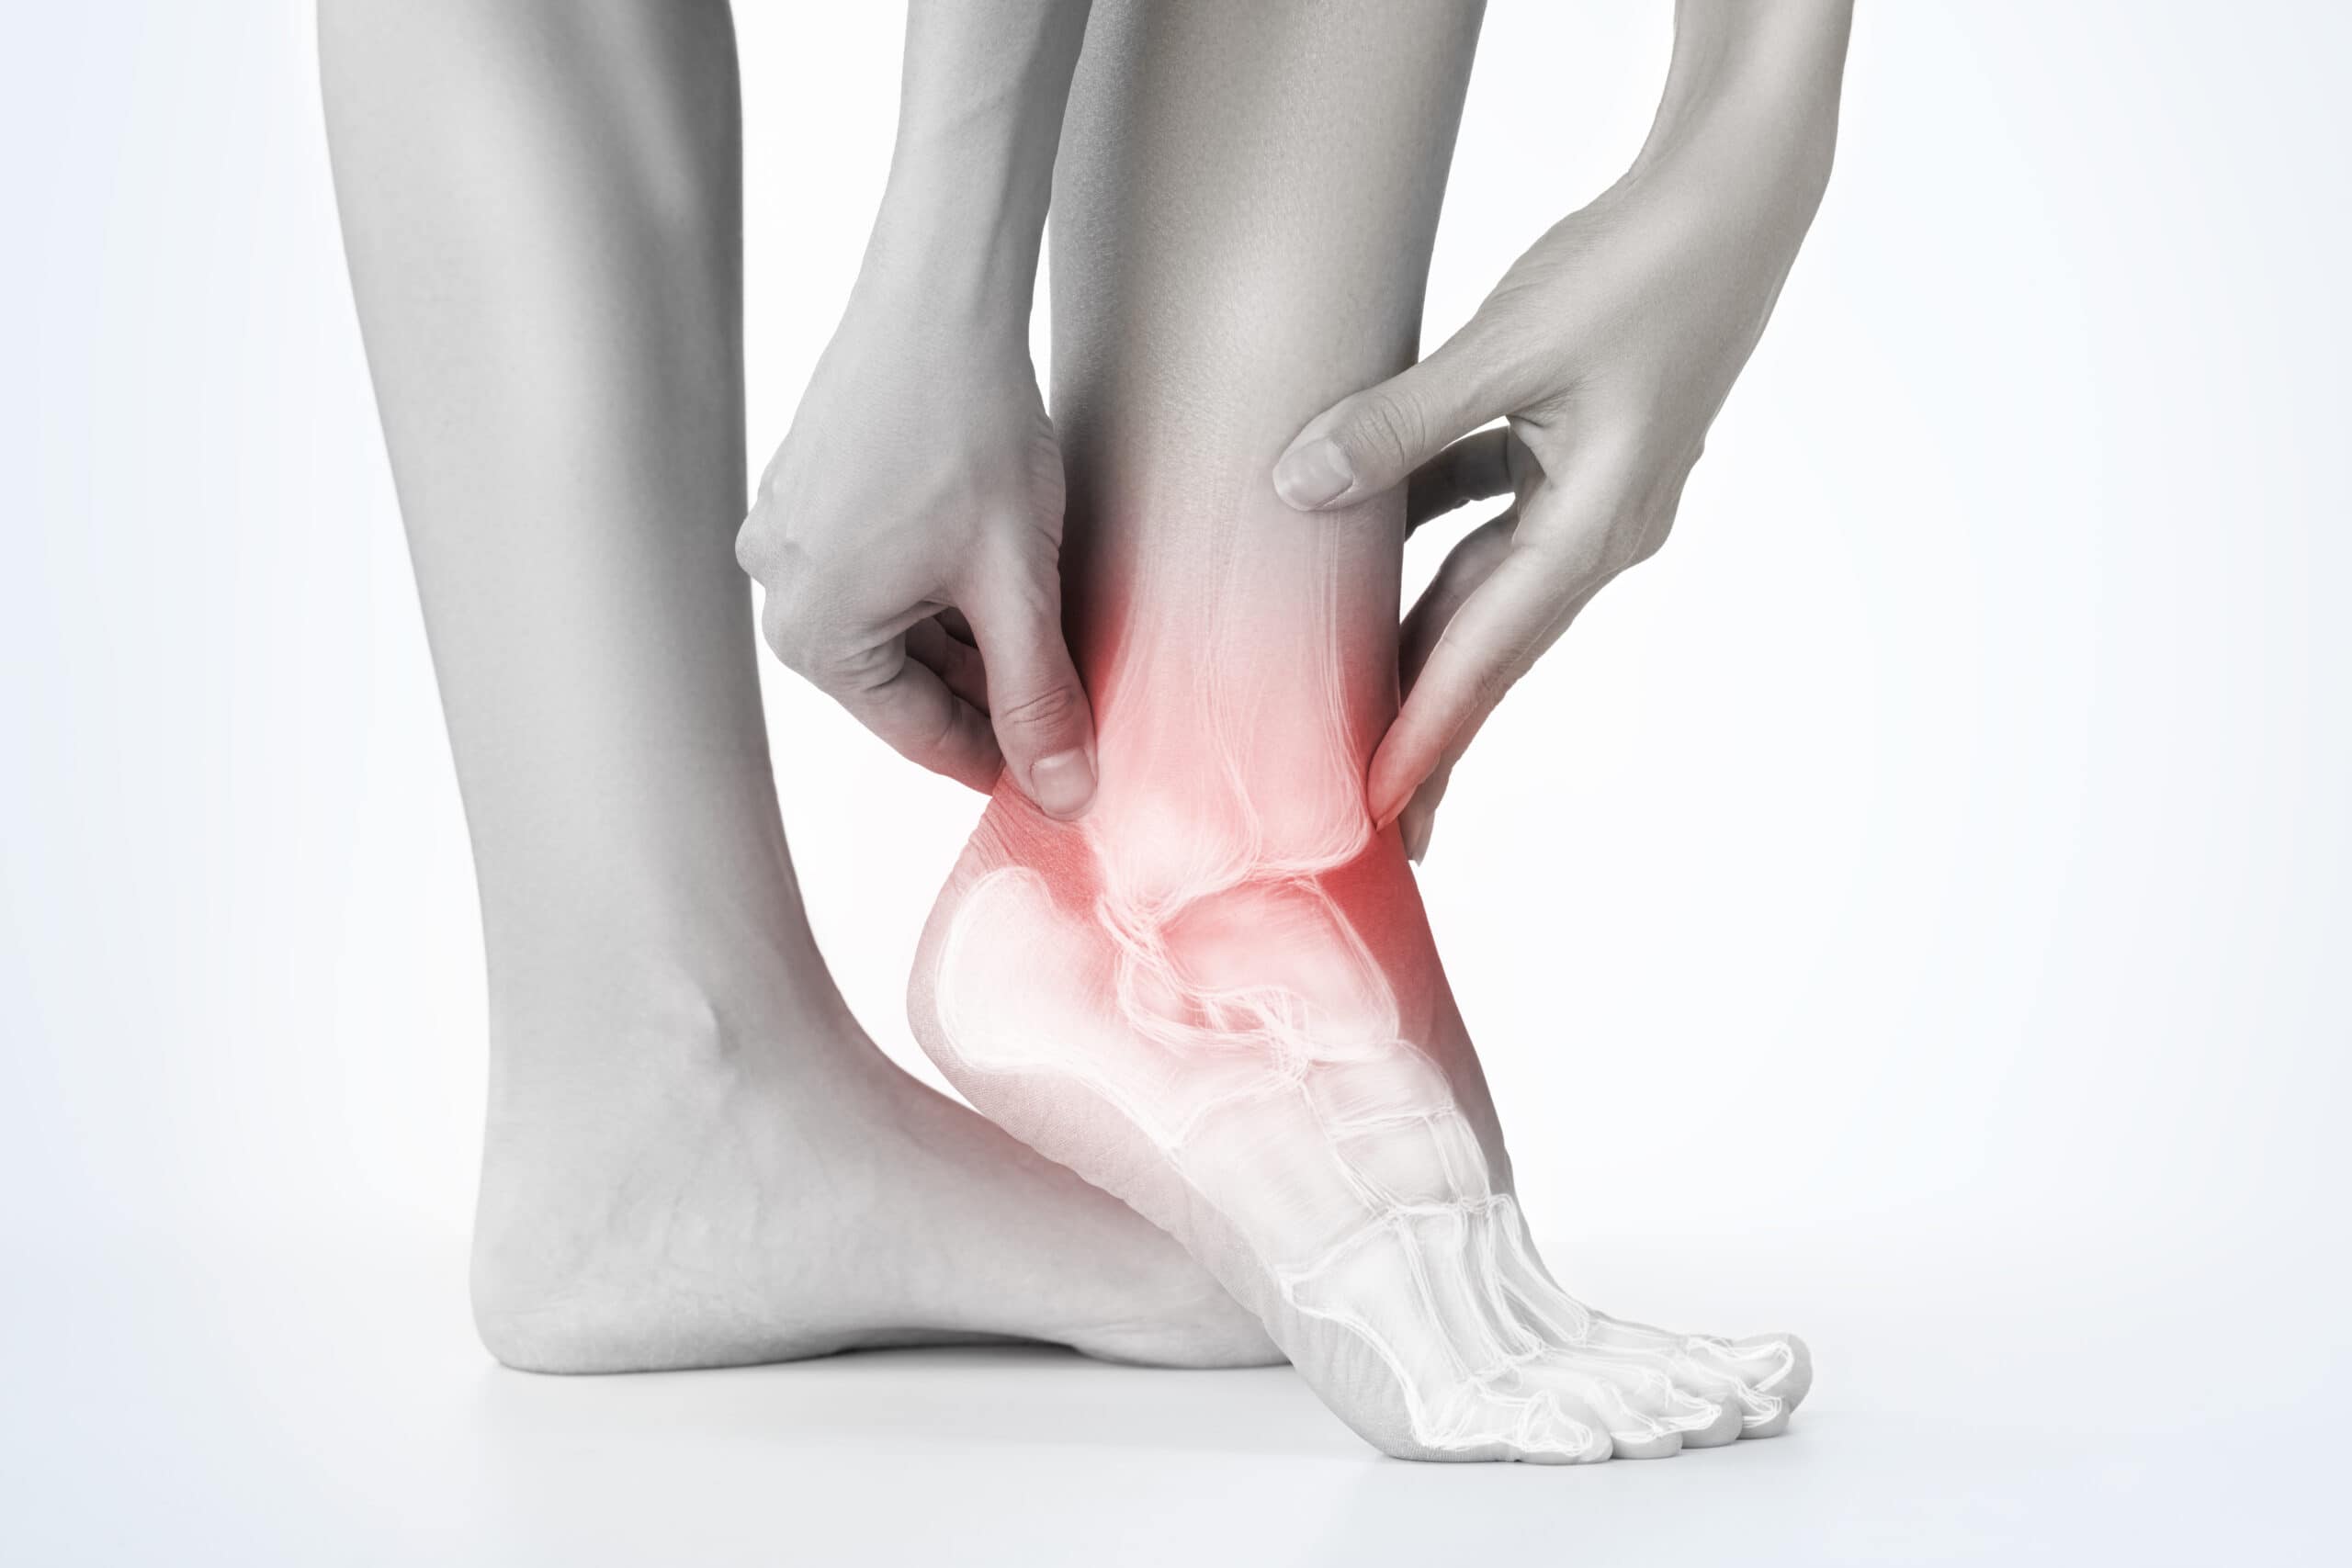 Sinus Tarsi Syndrome affects the small divot on the outside of your ankle causing pain and inflammation to the area